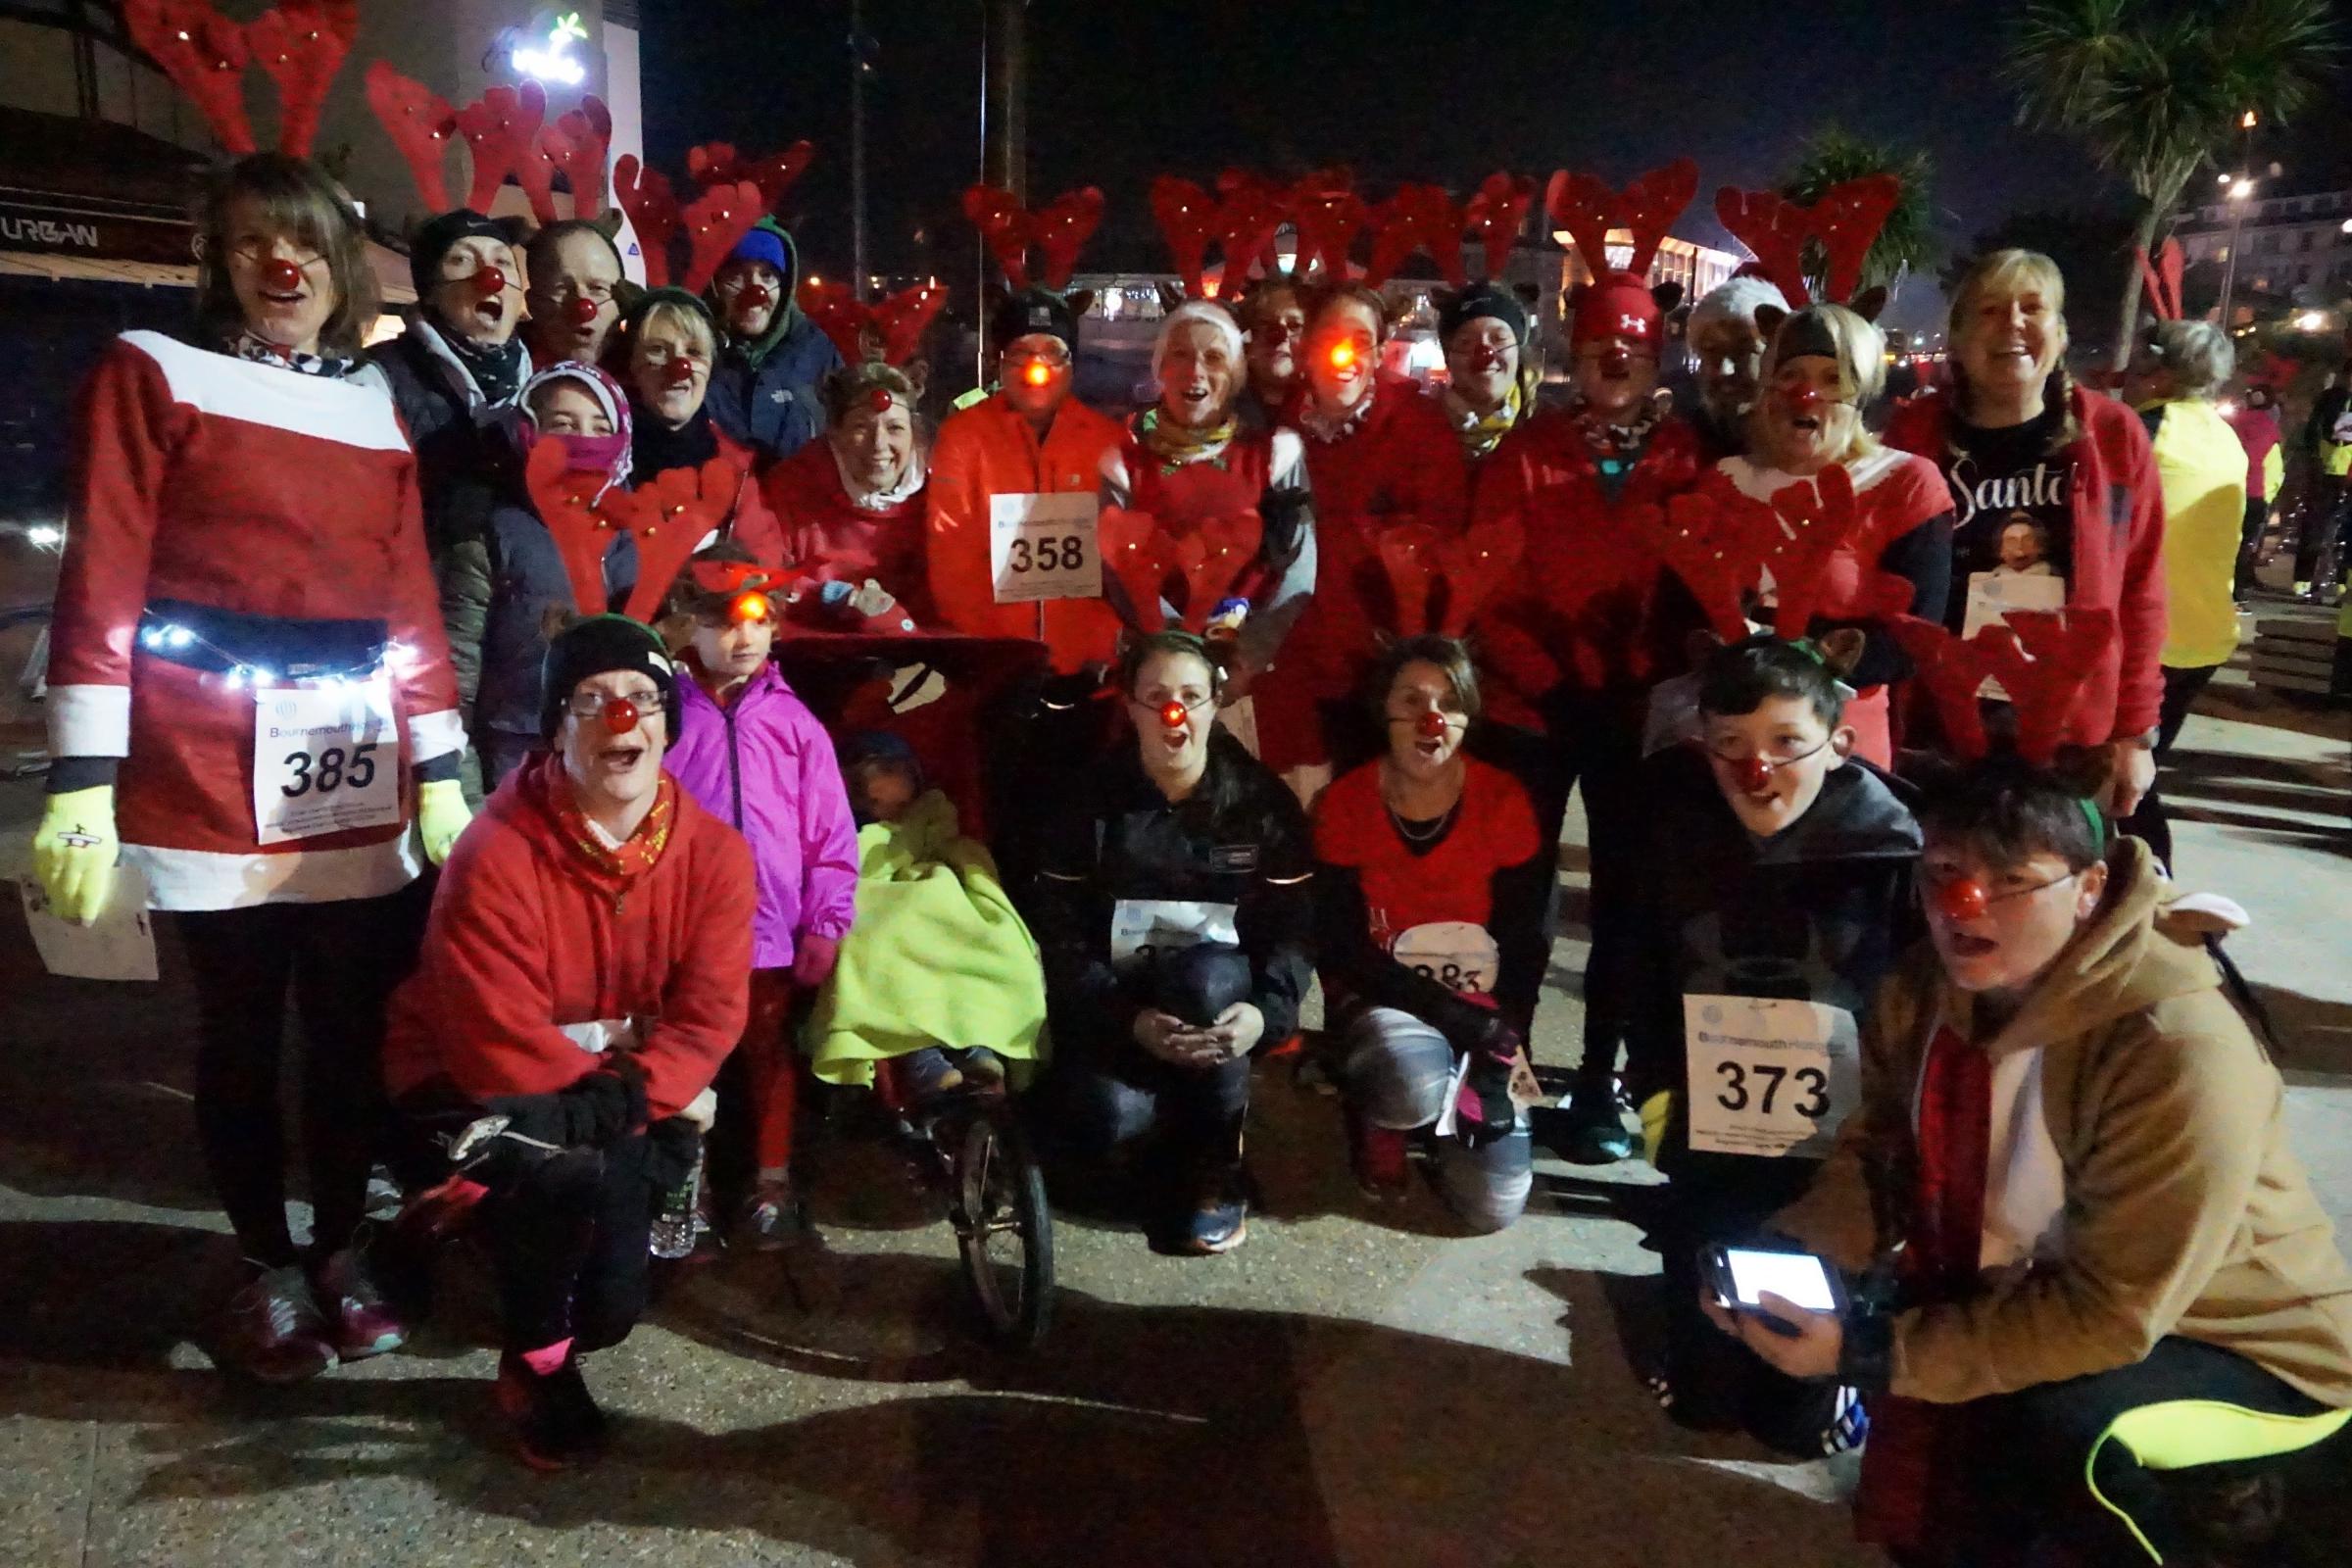 Reindeer, set, GO! Runners brave cold for seafront charity run